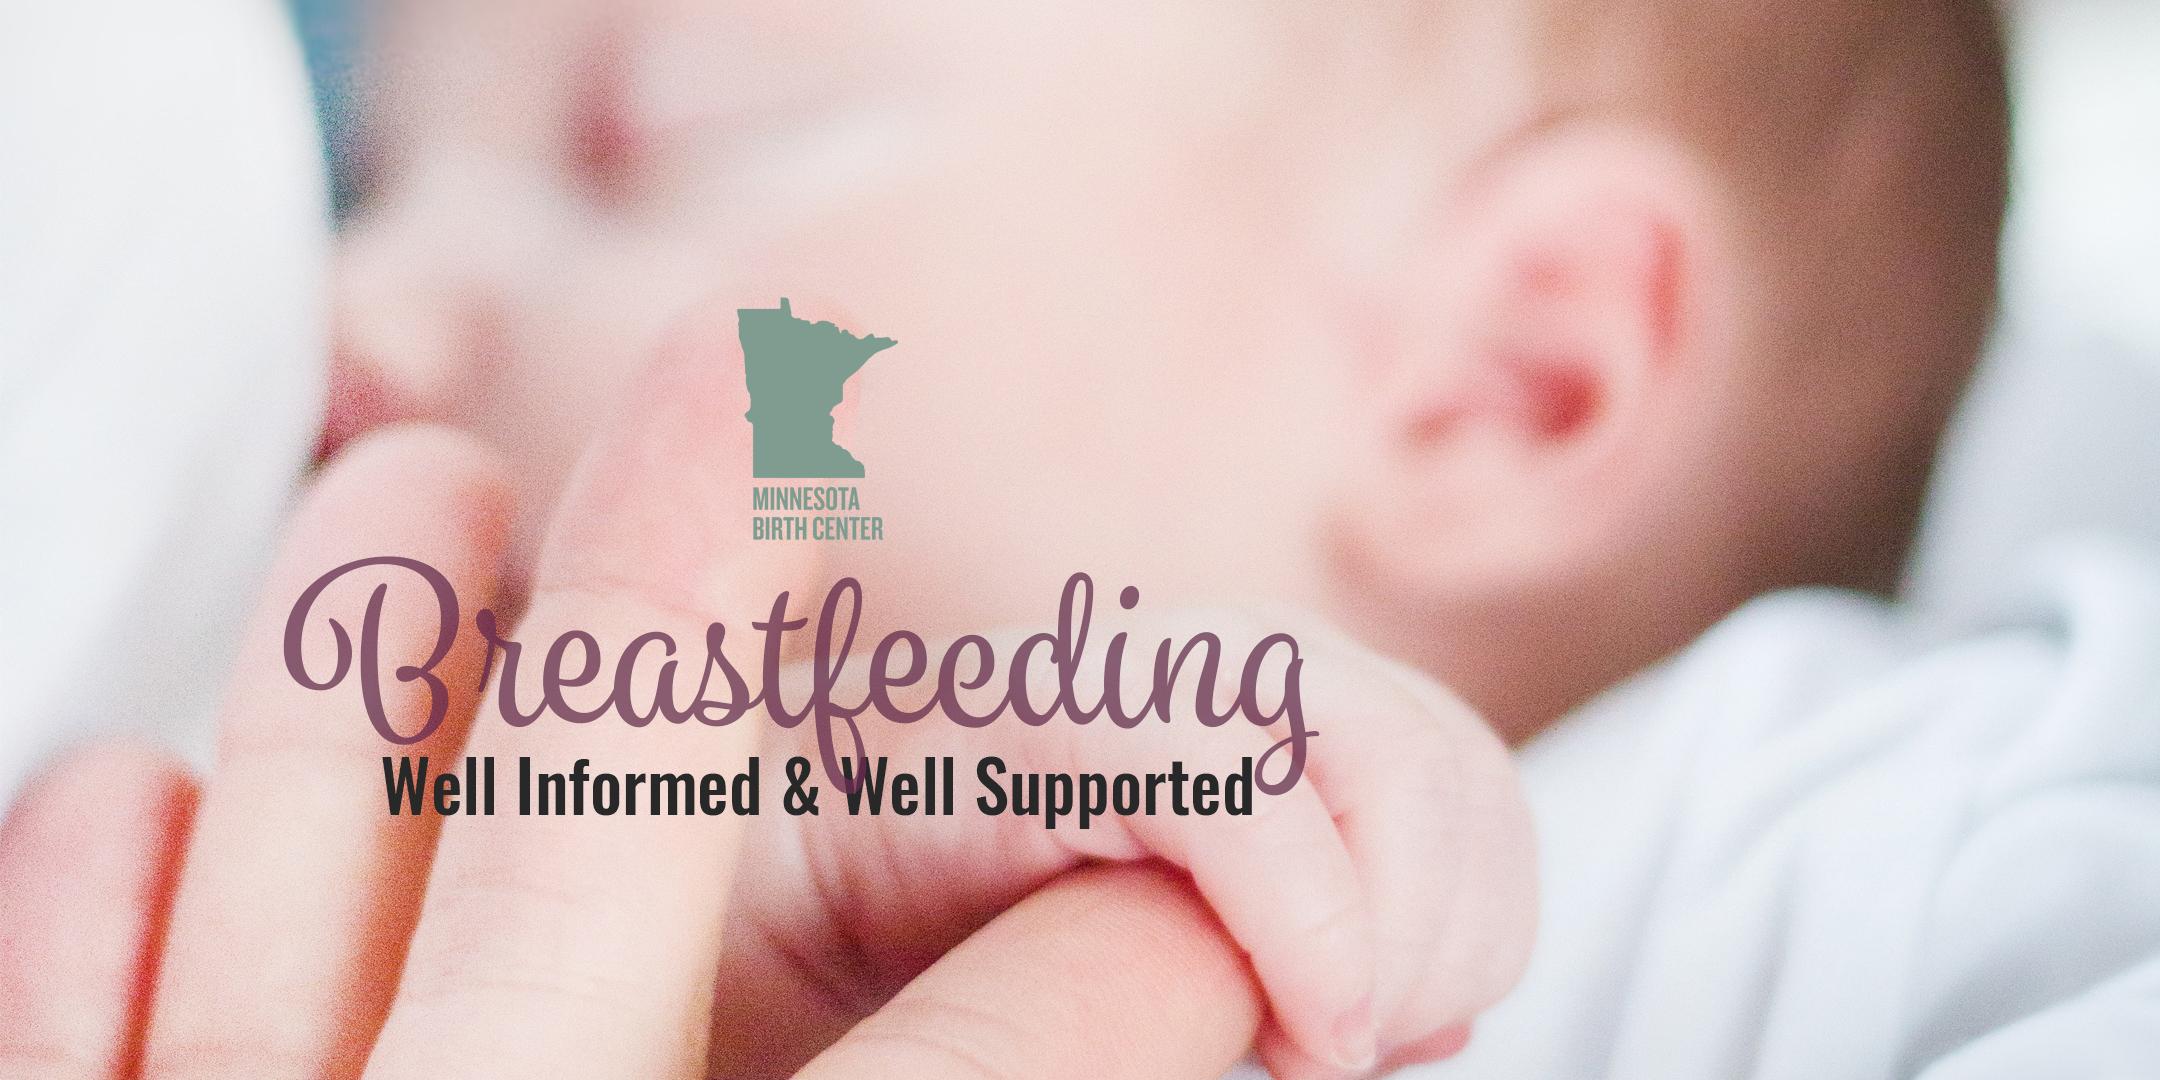 BREASTFEEDING Well Informed & Well Supported